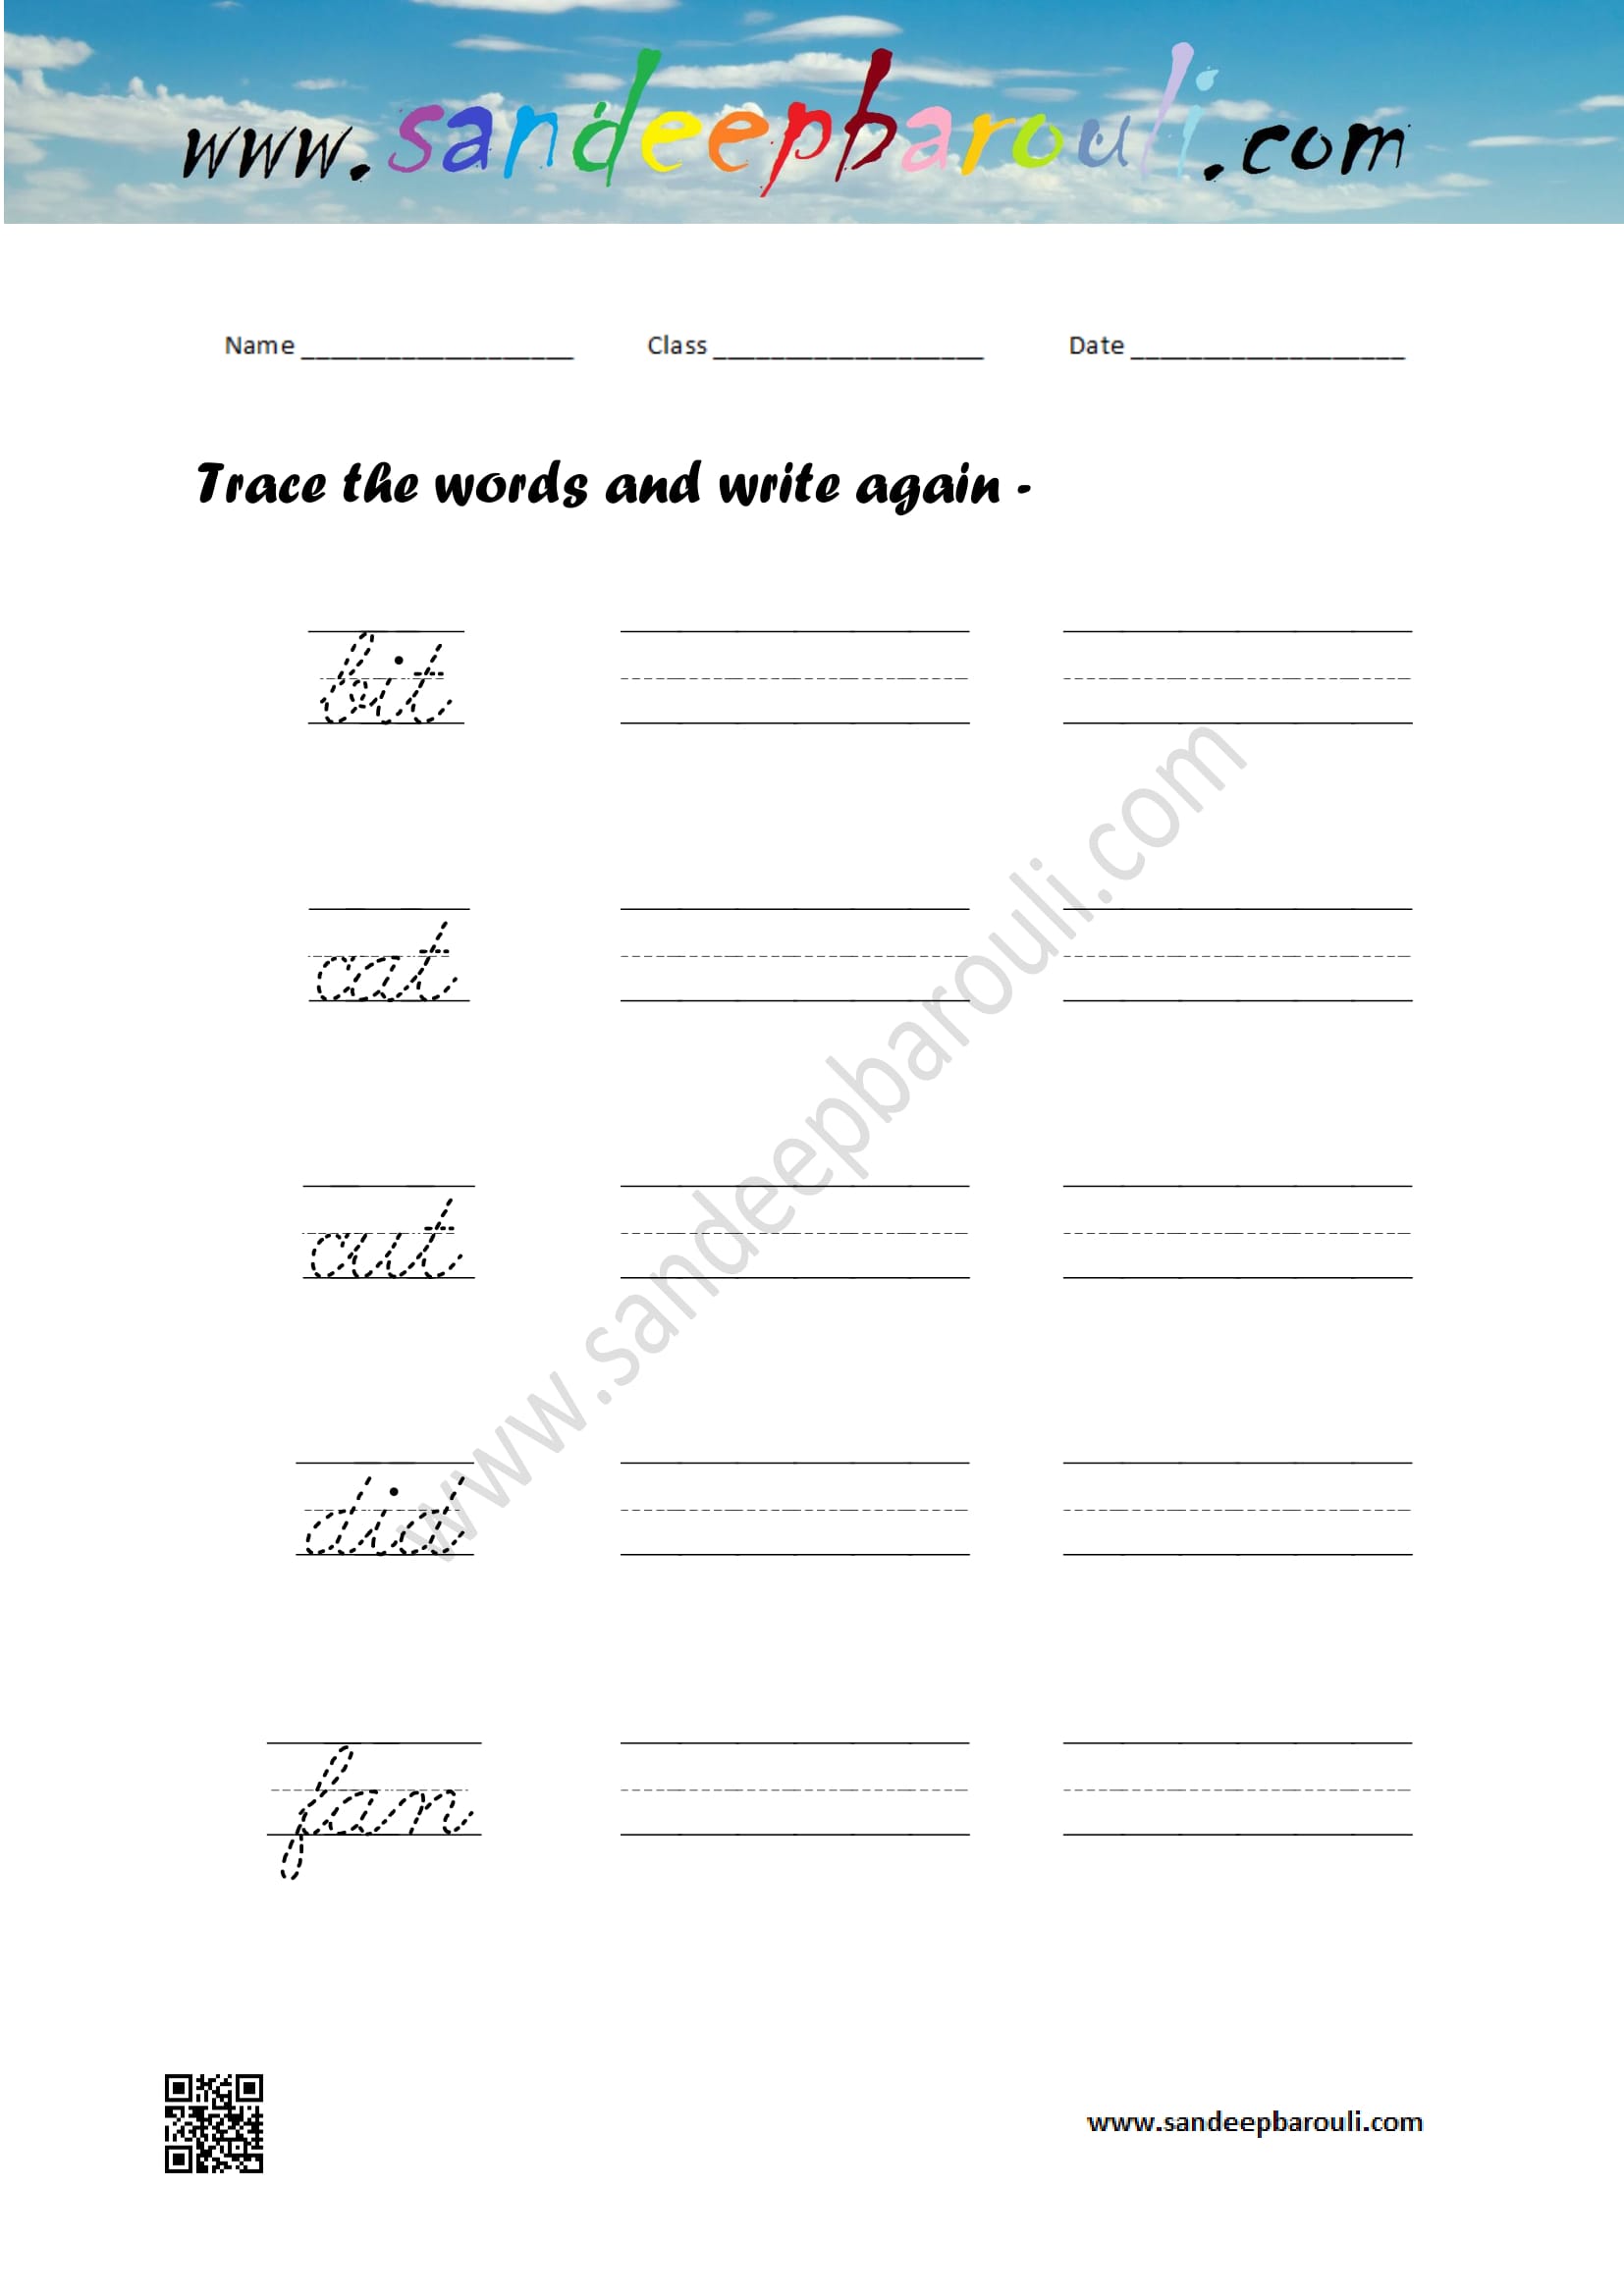 Cursive writing worksheet – trace the words and write again (32)